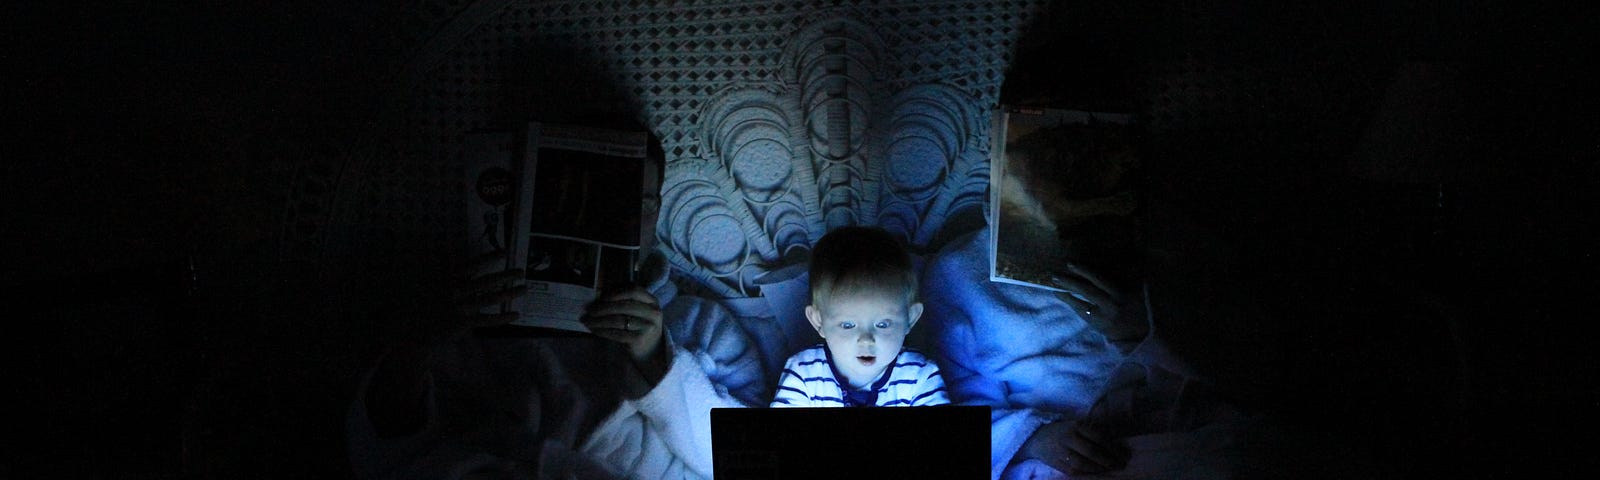 Little child watching a screen at night